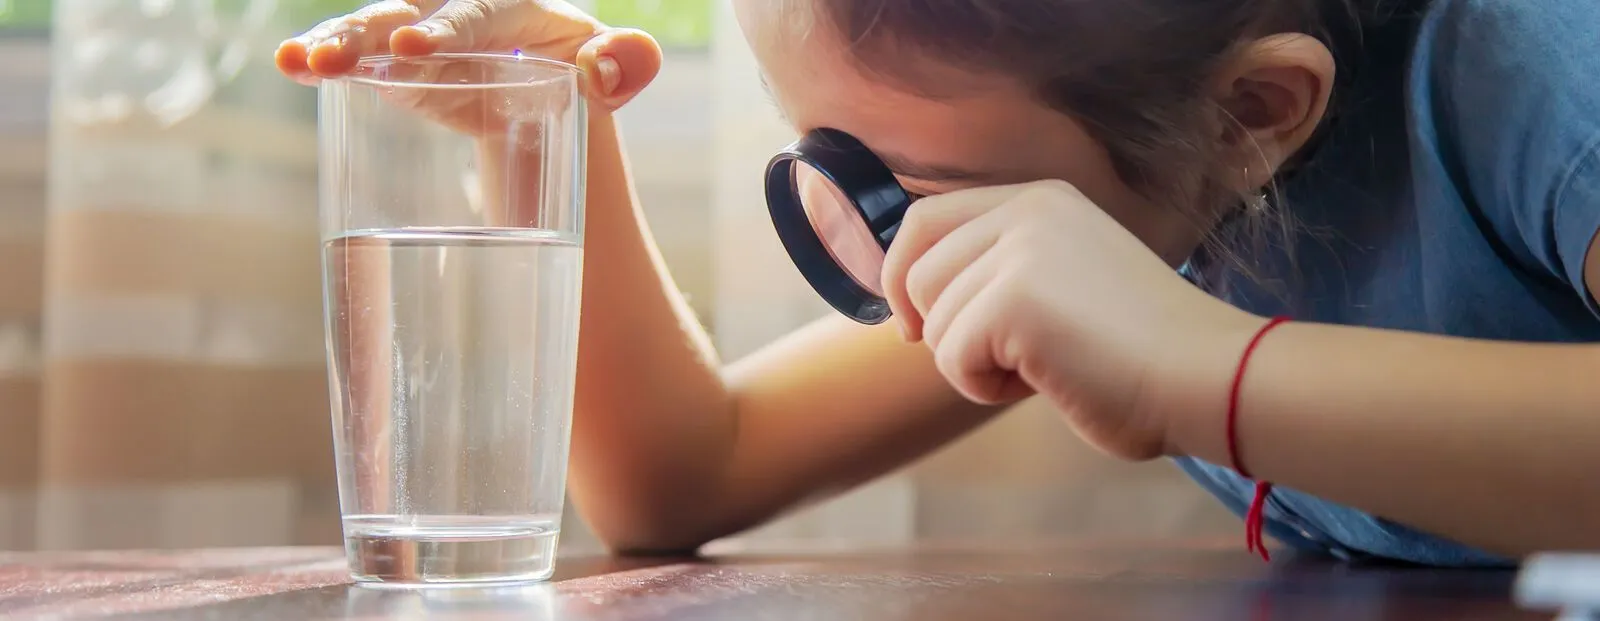 The child examines the water with a magnifying glass in a glass. Selective focus..jpg